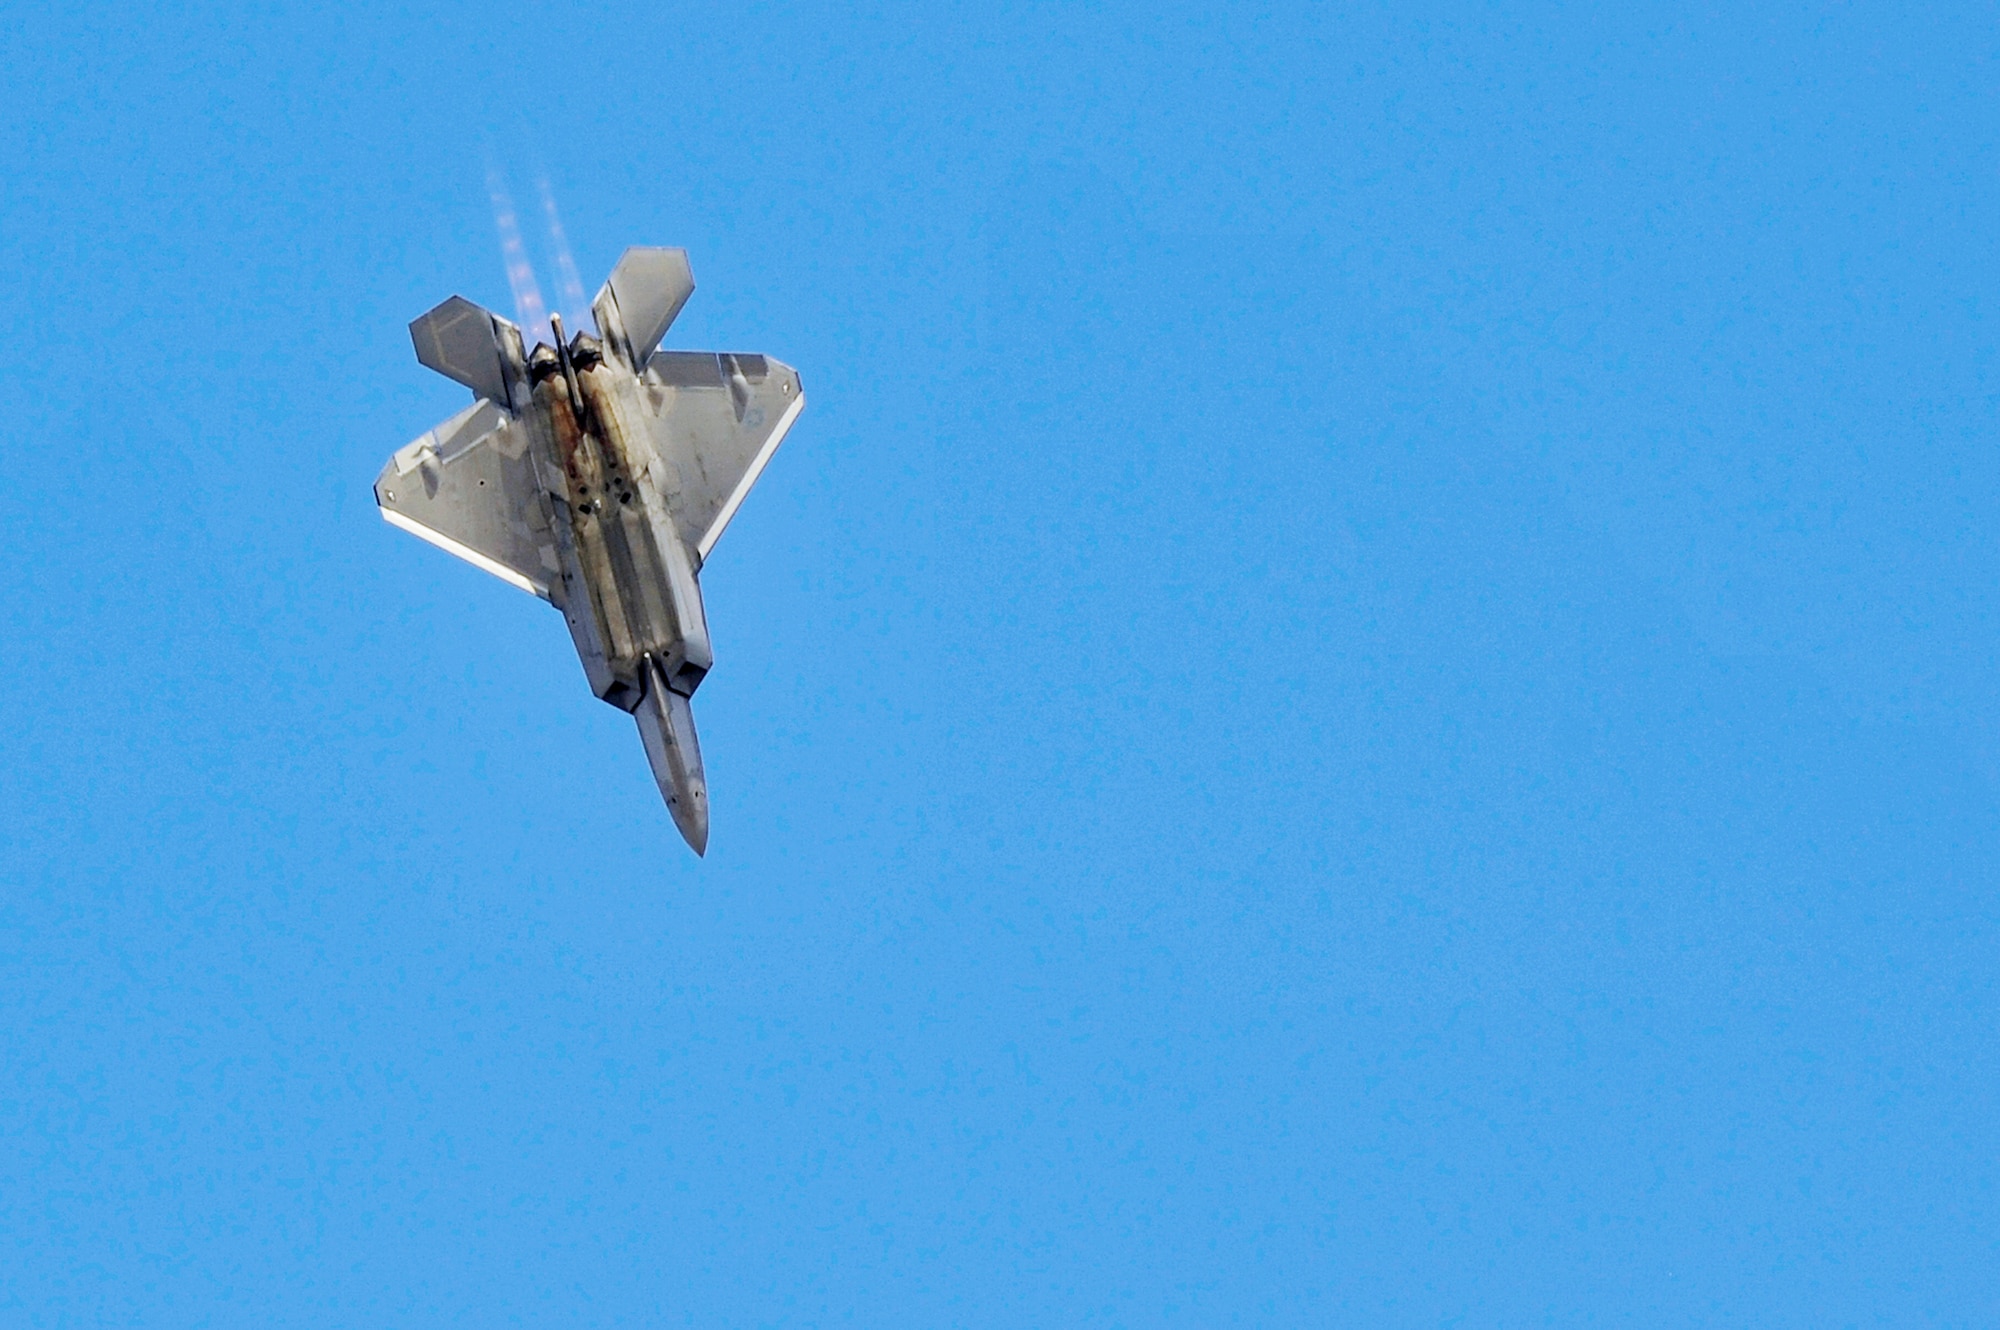 An F-22 Raptor performs a dive Nov. 15, 2009 at the Dubai Air Show in the United Arab Emirates. The F-22 provides the Air Force with a combination of stealth, supercruise, maneuverability and integrated avionics. (U.S. Air Force photo/Tech. Sgt. Charles Larkin Sr.)